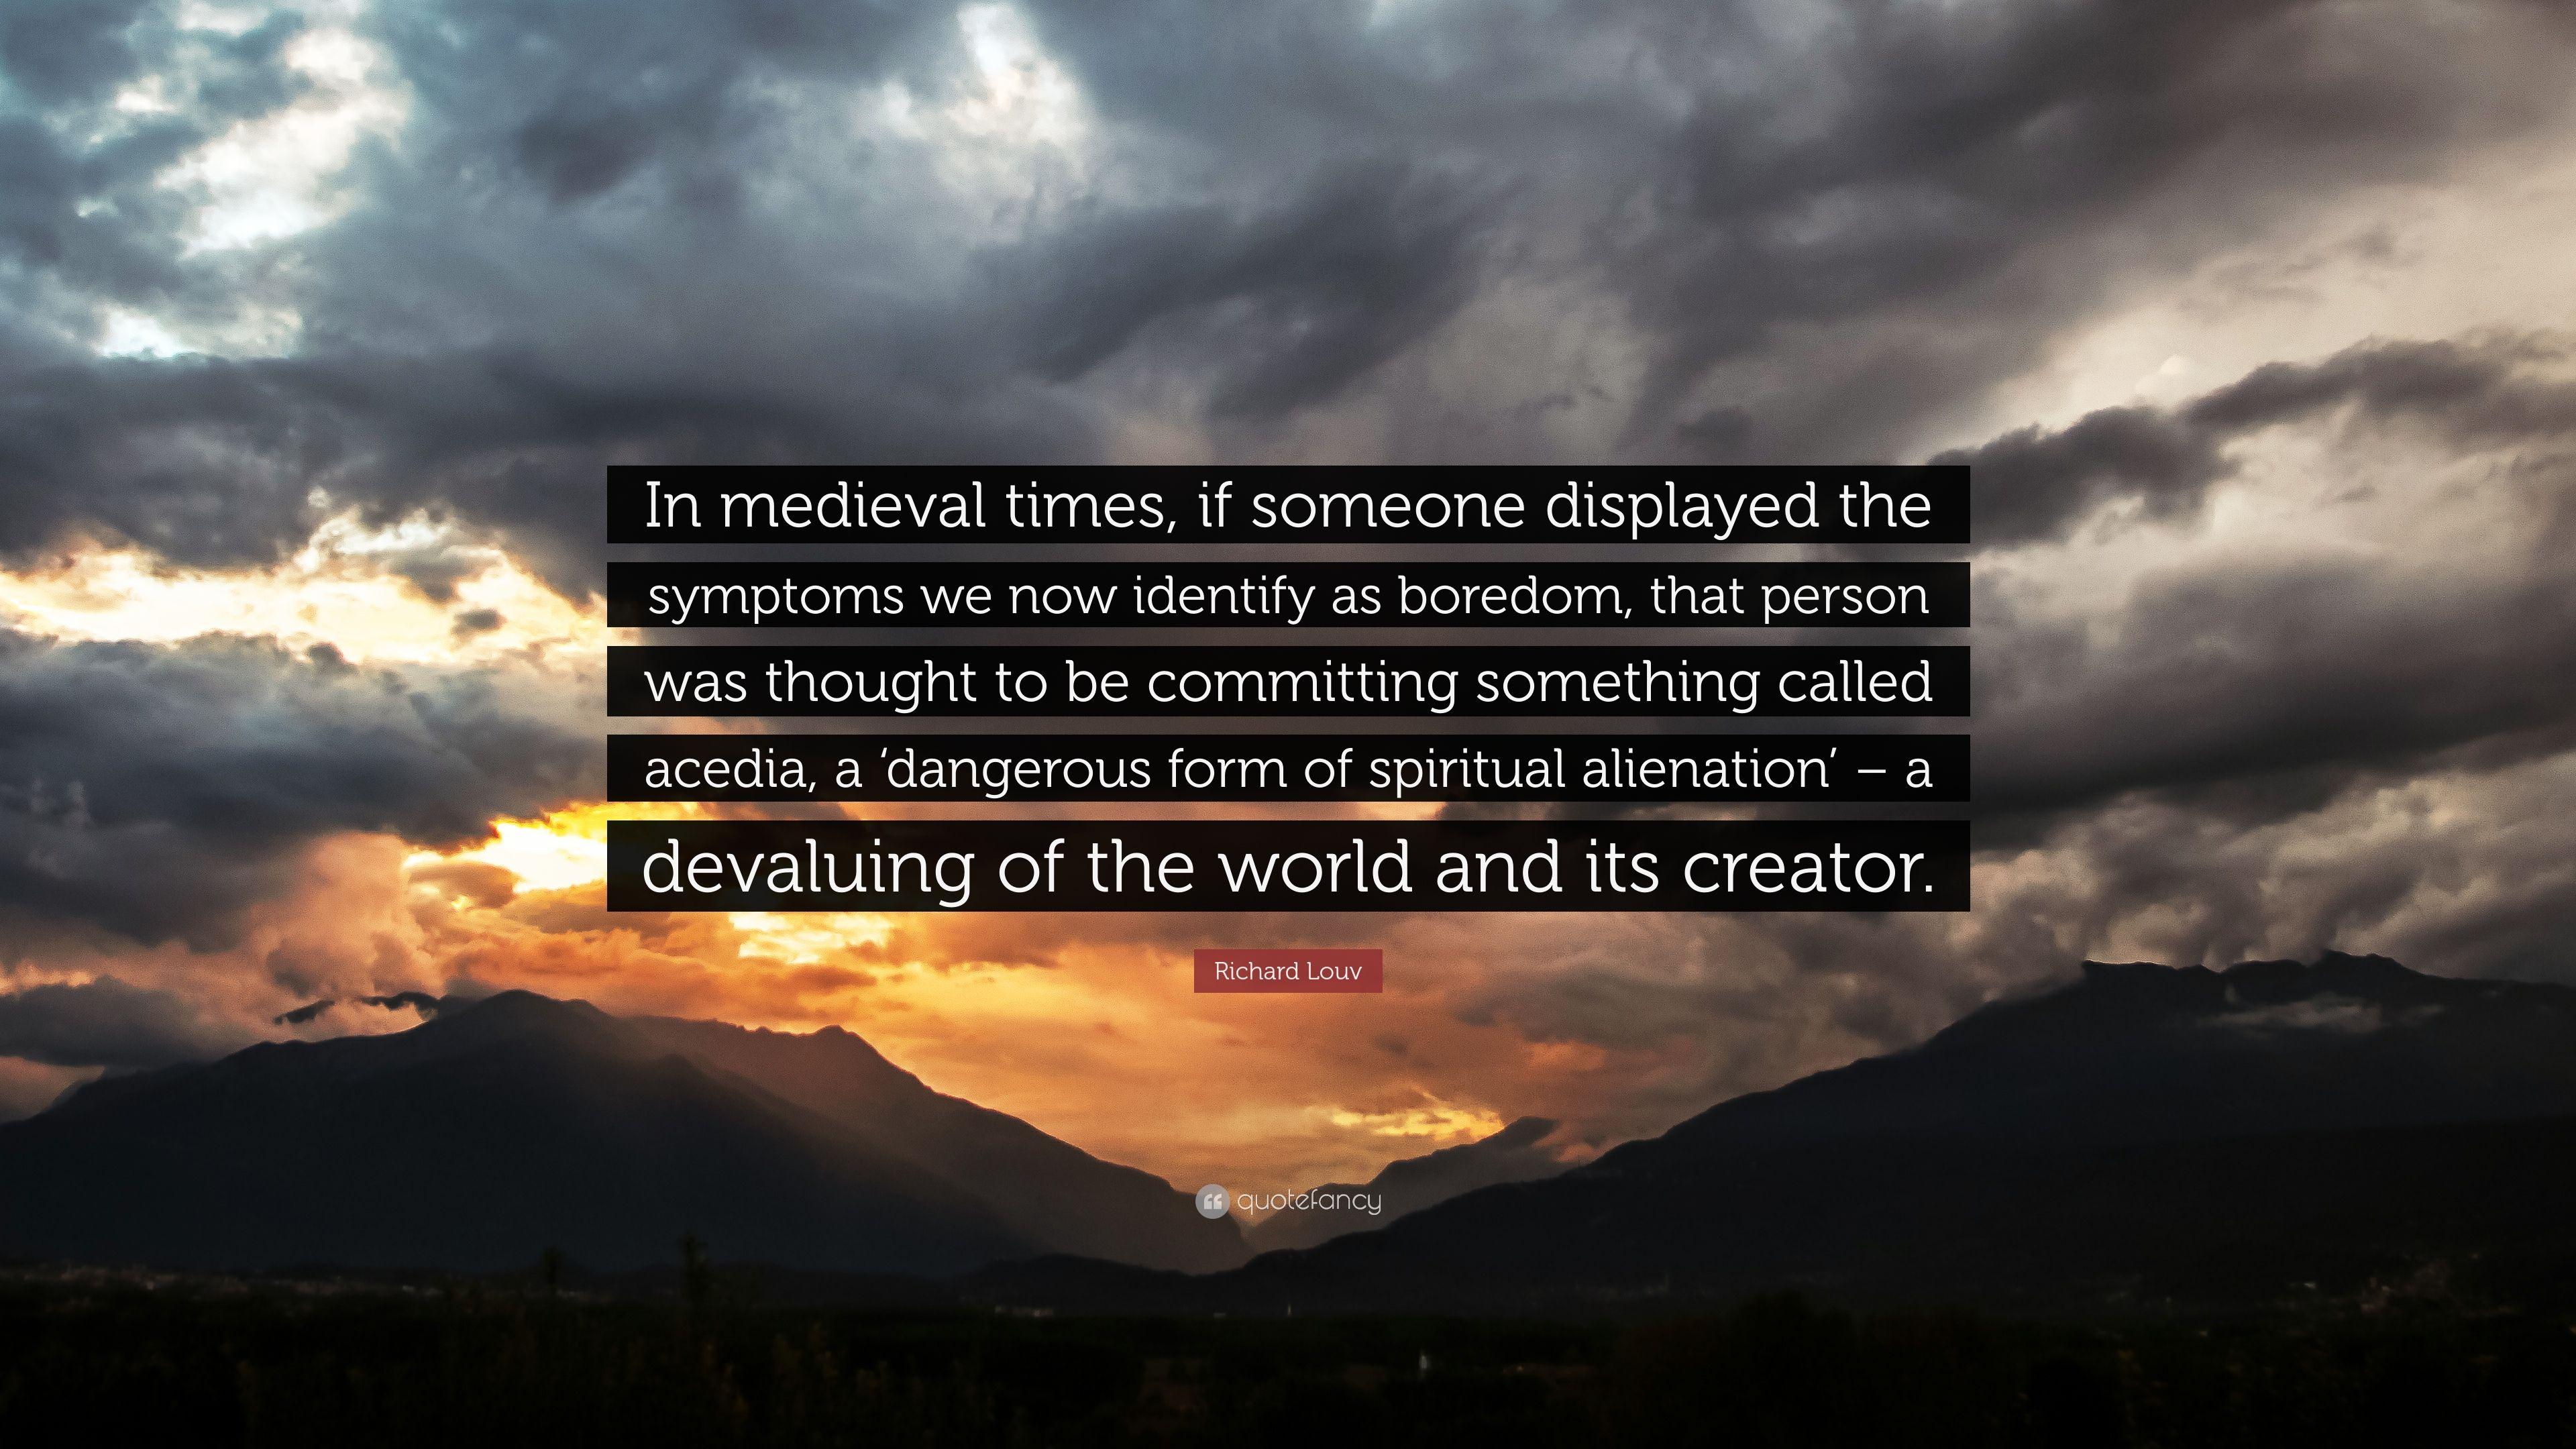 Richard Louv Quote: “In medieval times, if someone displayed